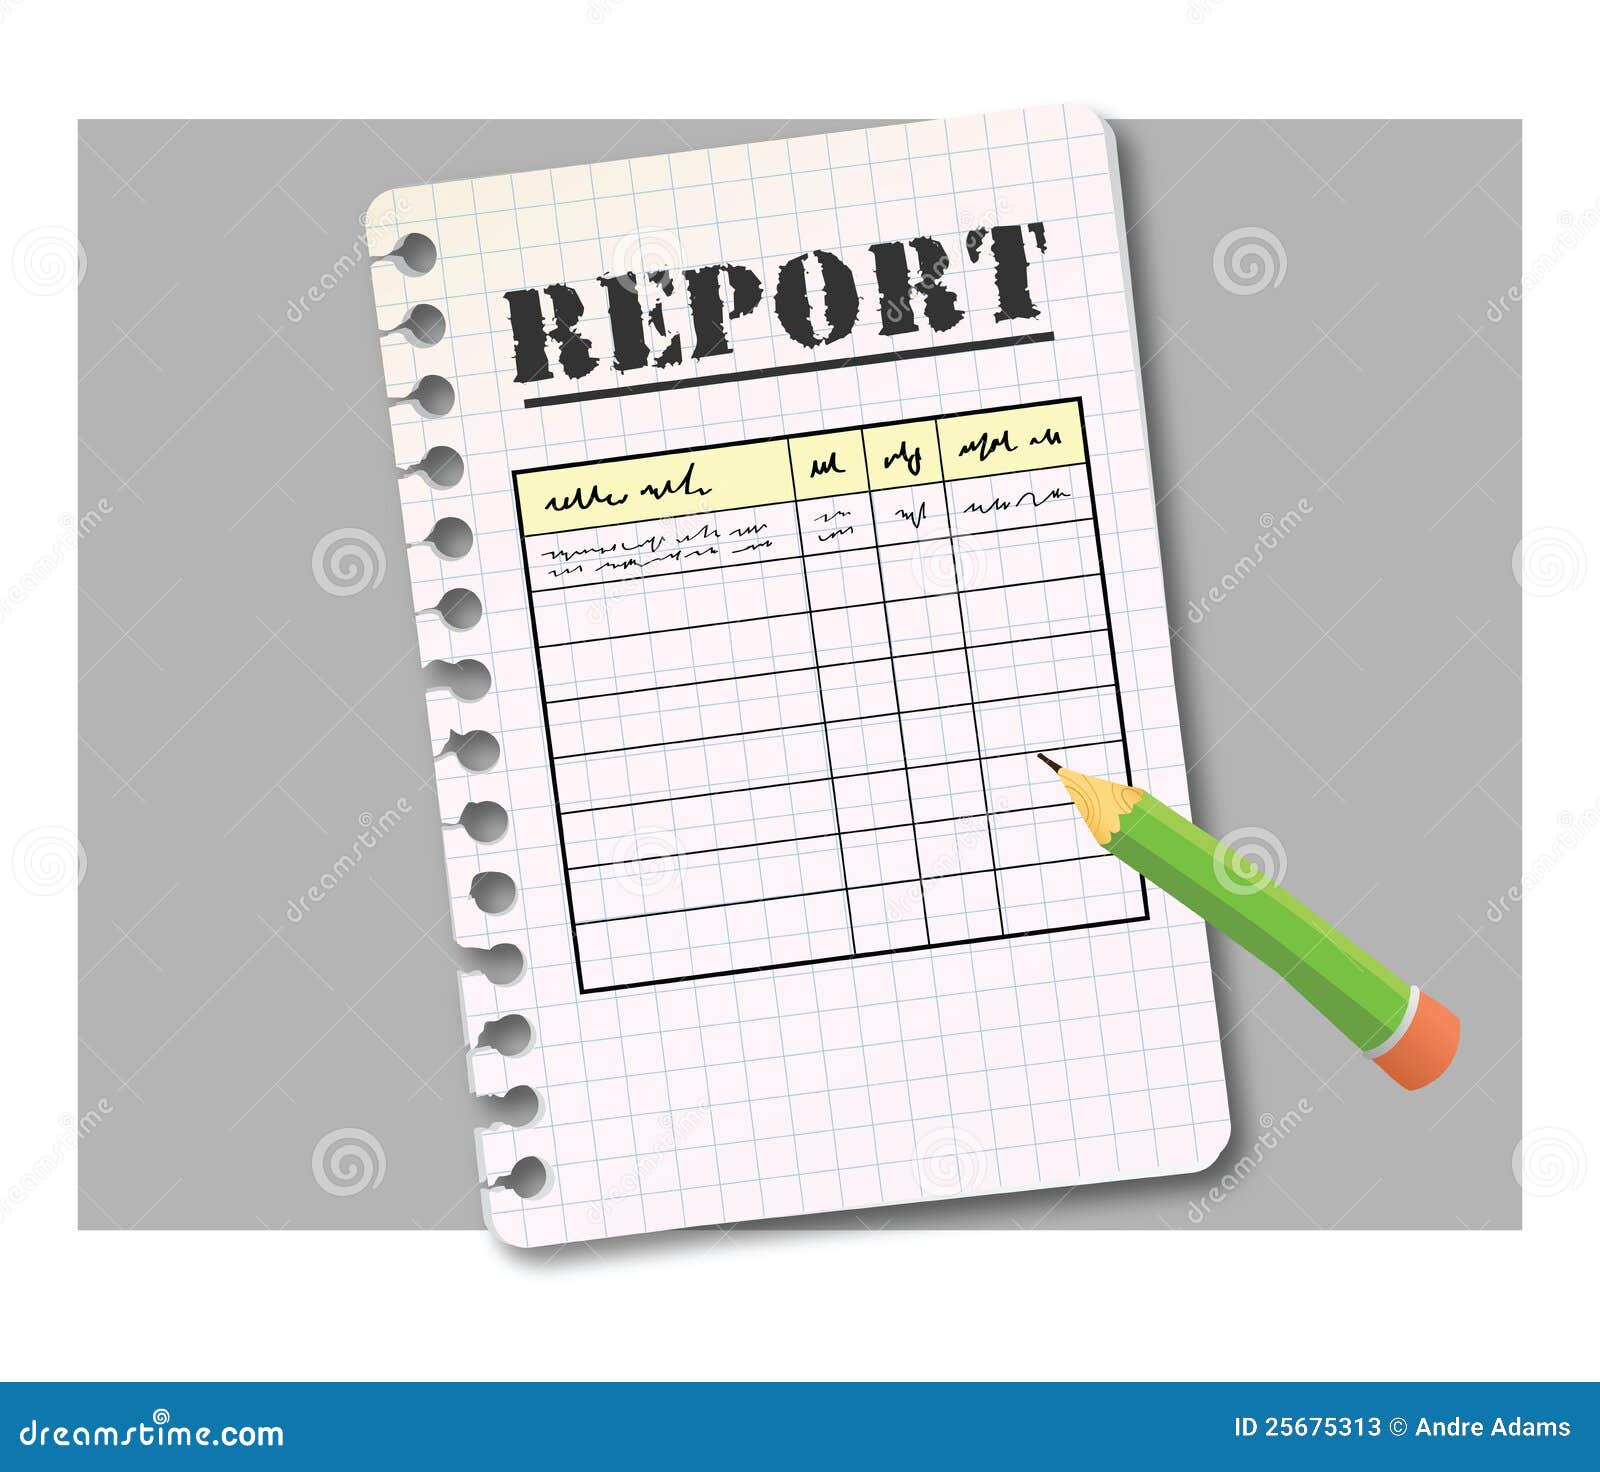 business report clipart - photo #38